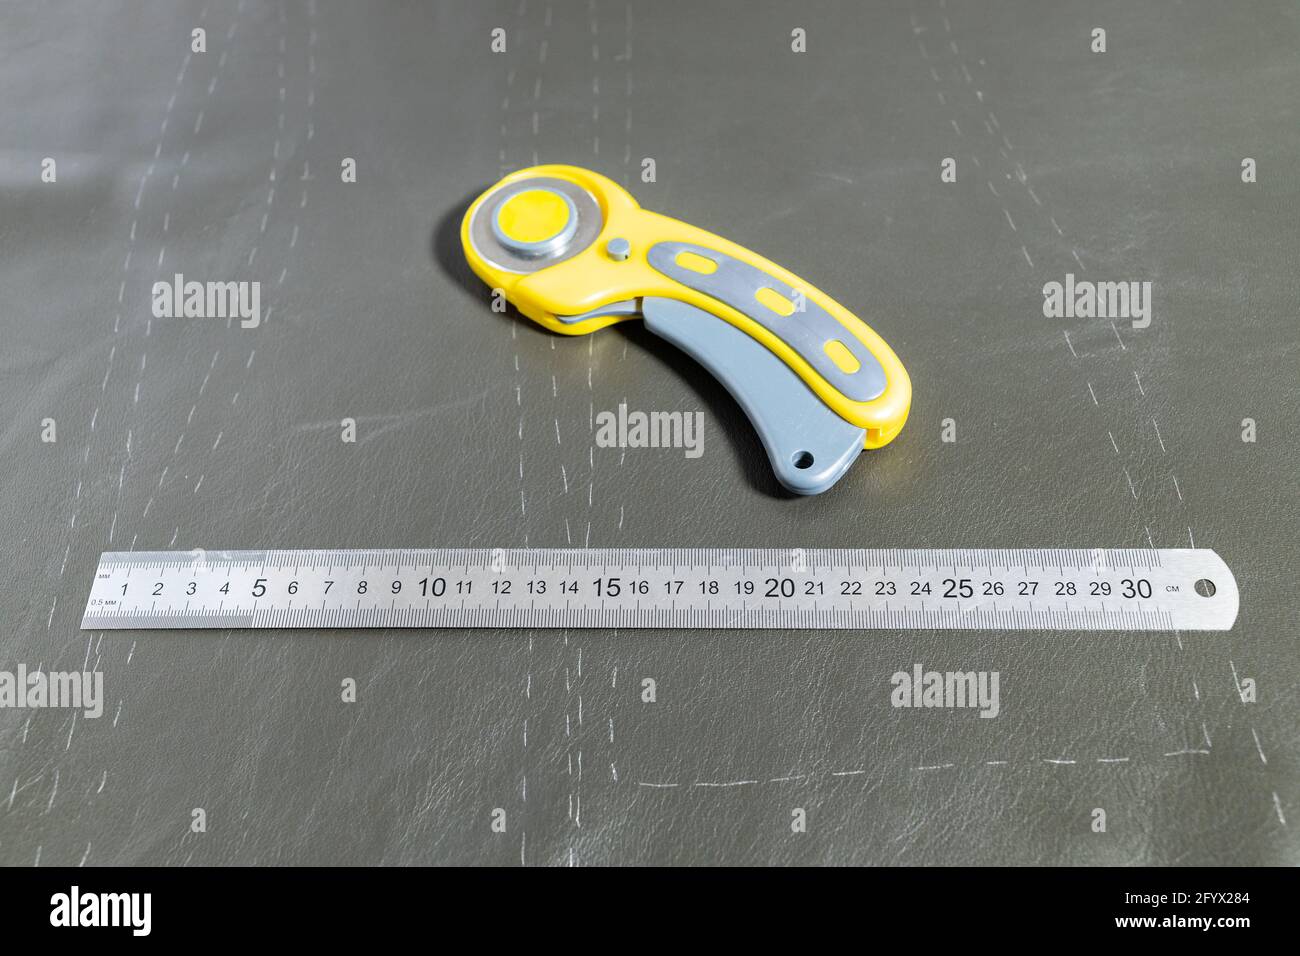 Compact Rotary Cutter Leather